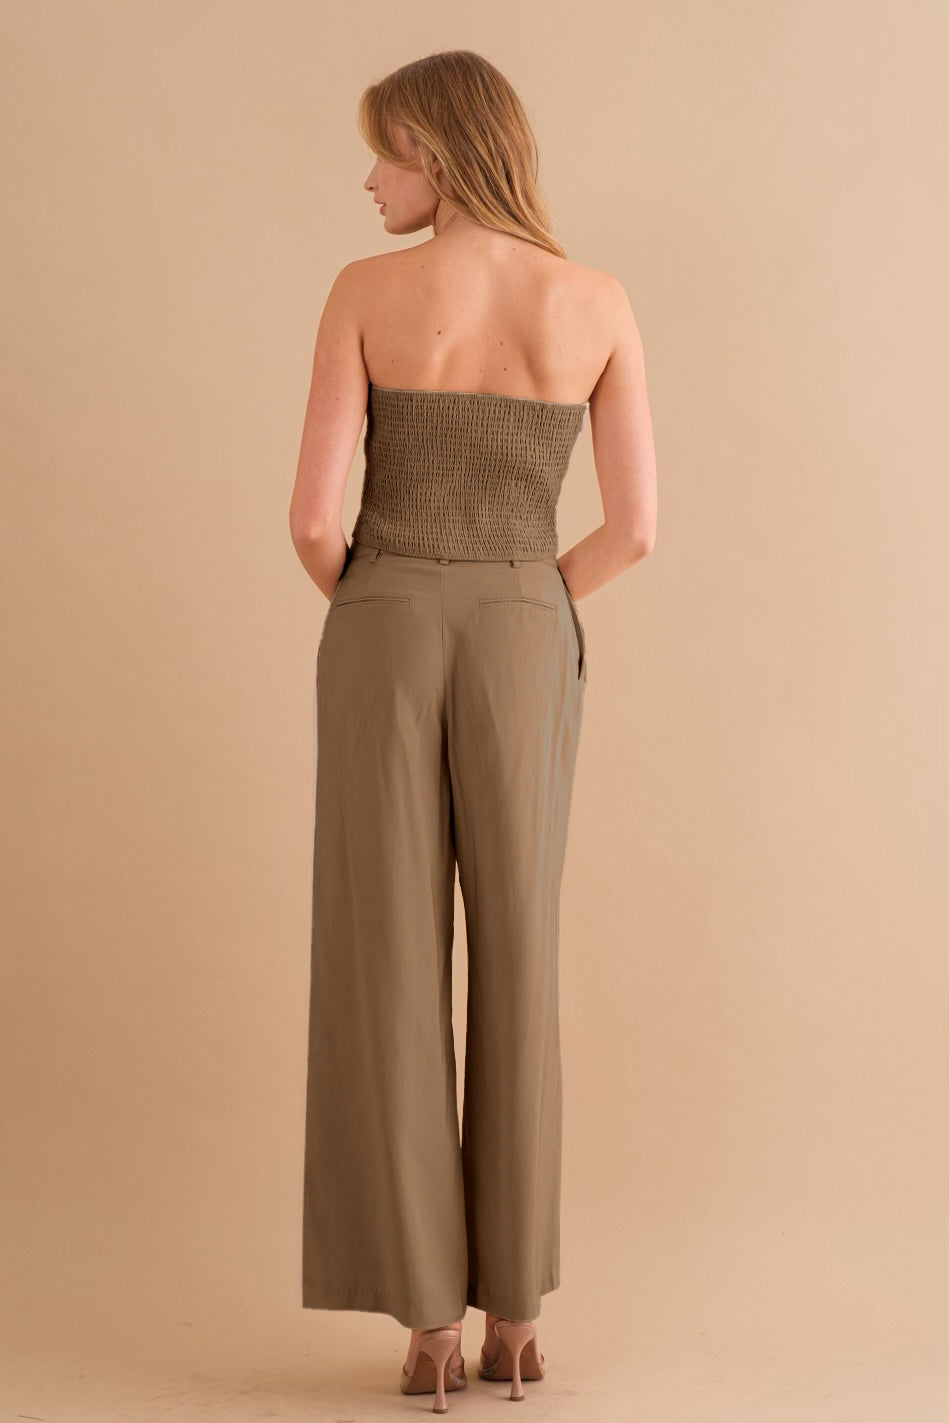 A backside view of a model wearing a two piece strapless top and pant set against a tan wall. 